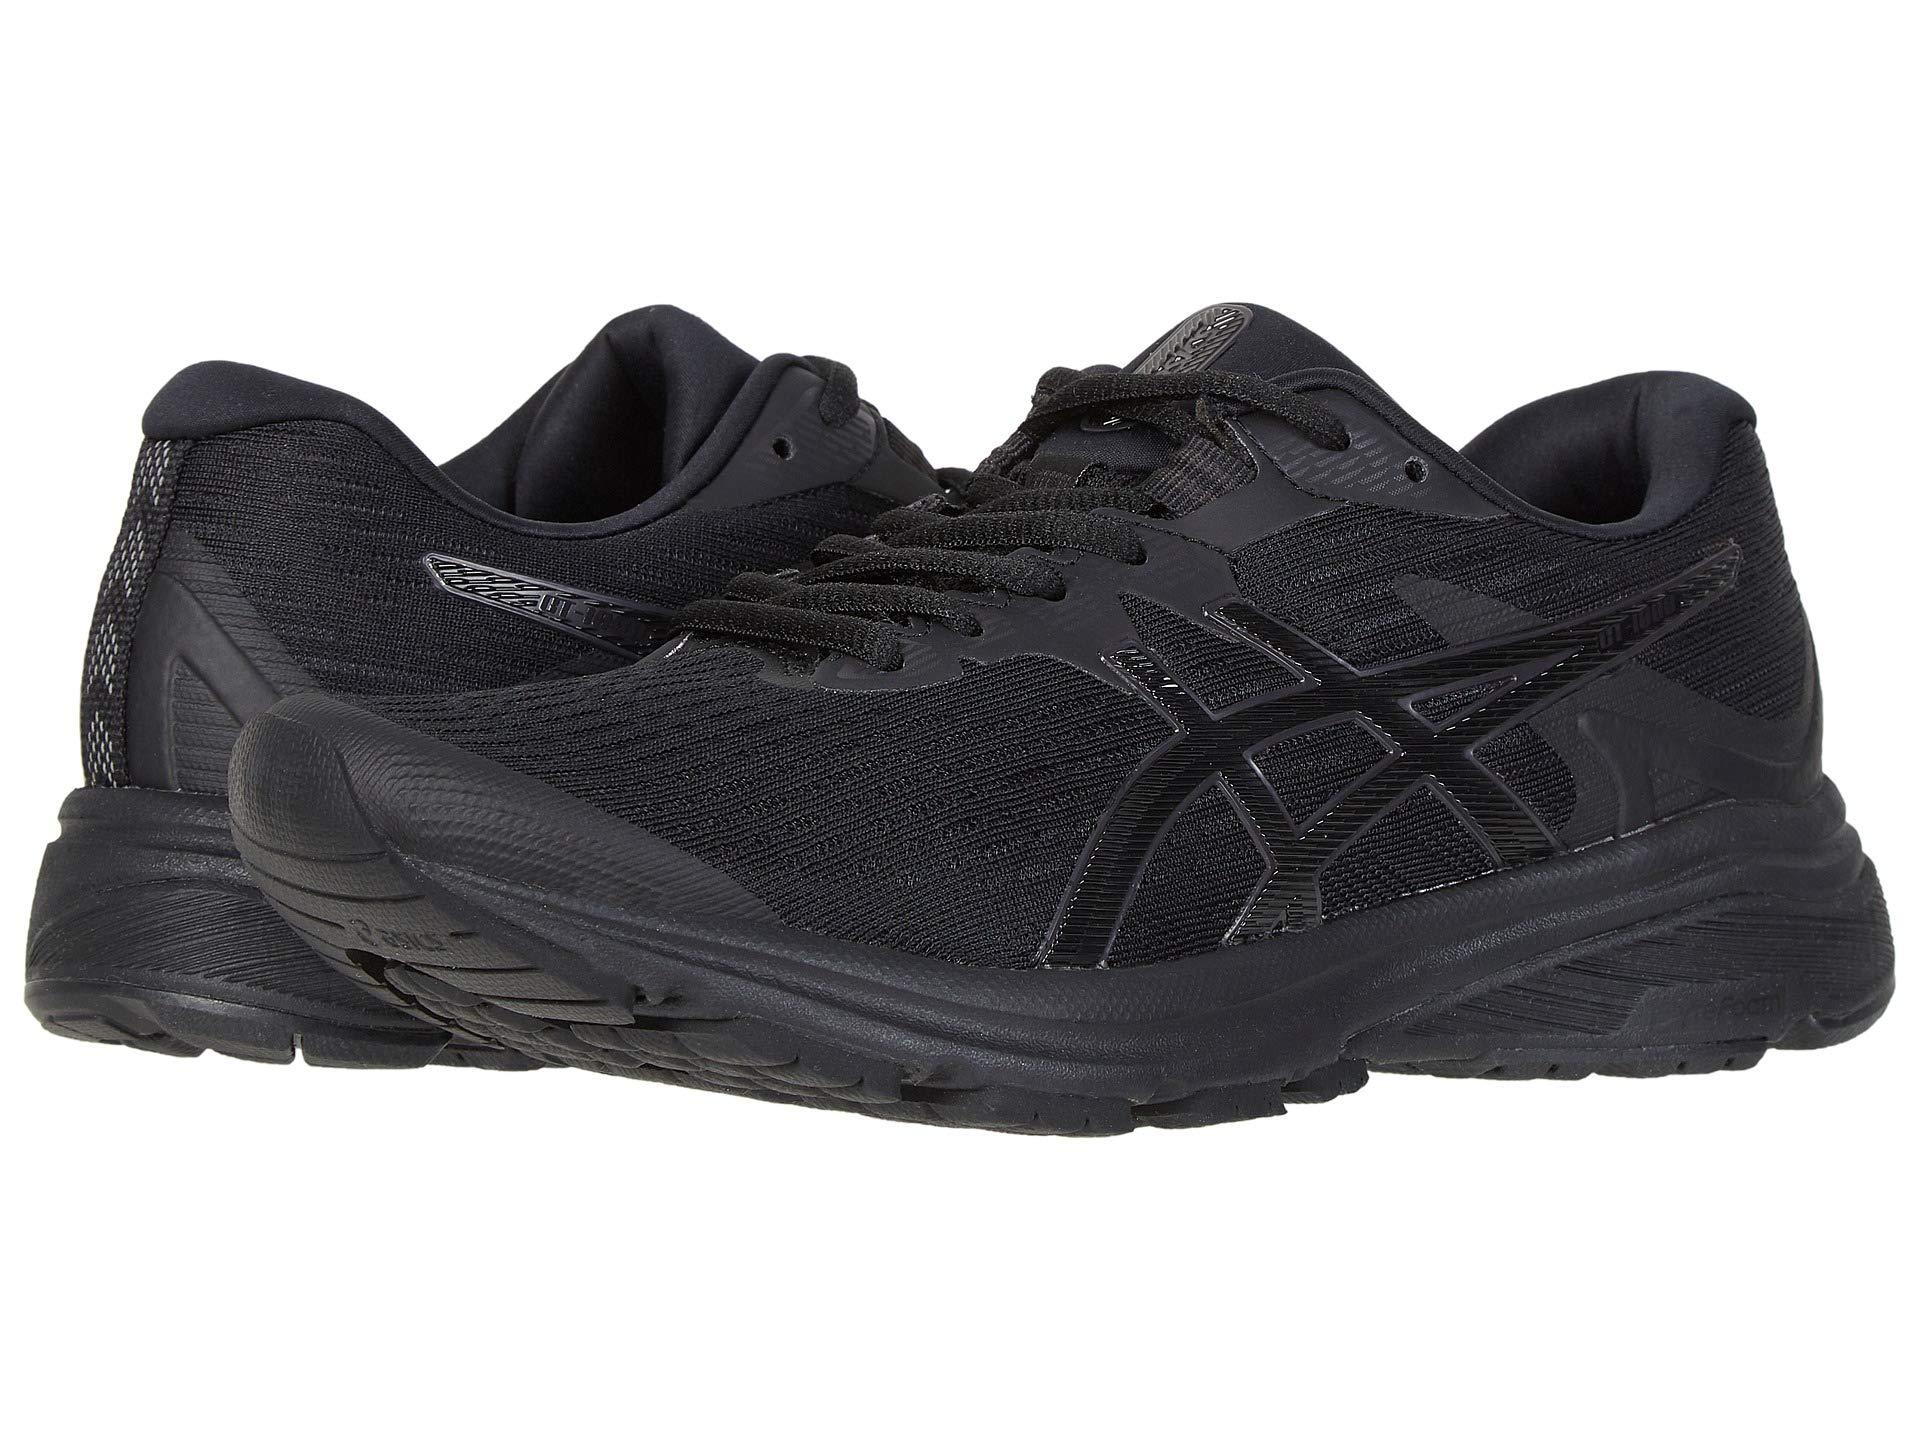 Asics Synthetic Gt-1000 8 in Black - Lyst